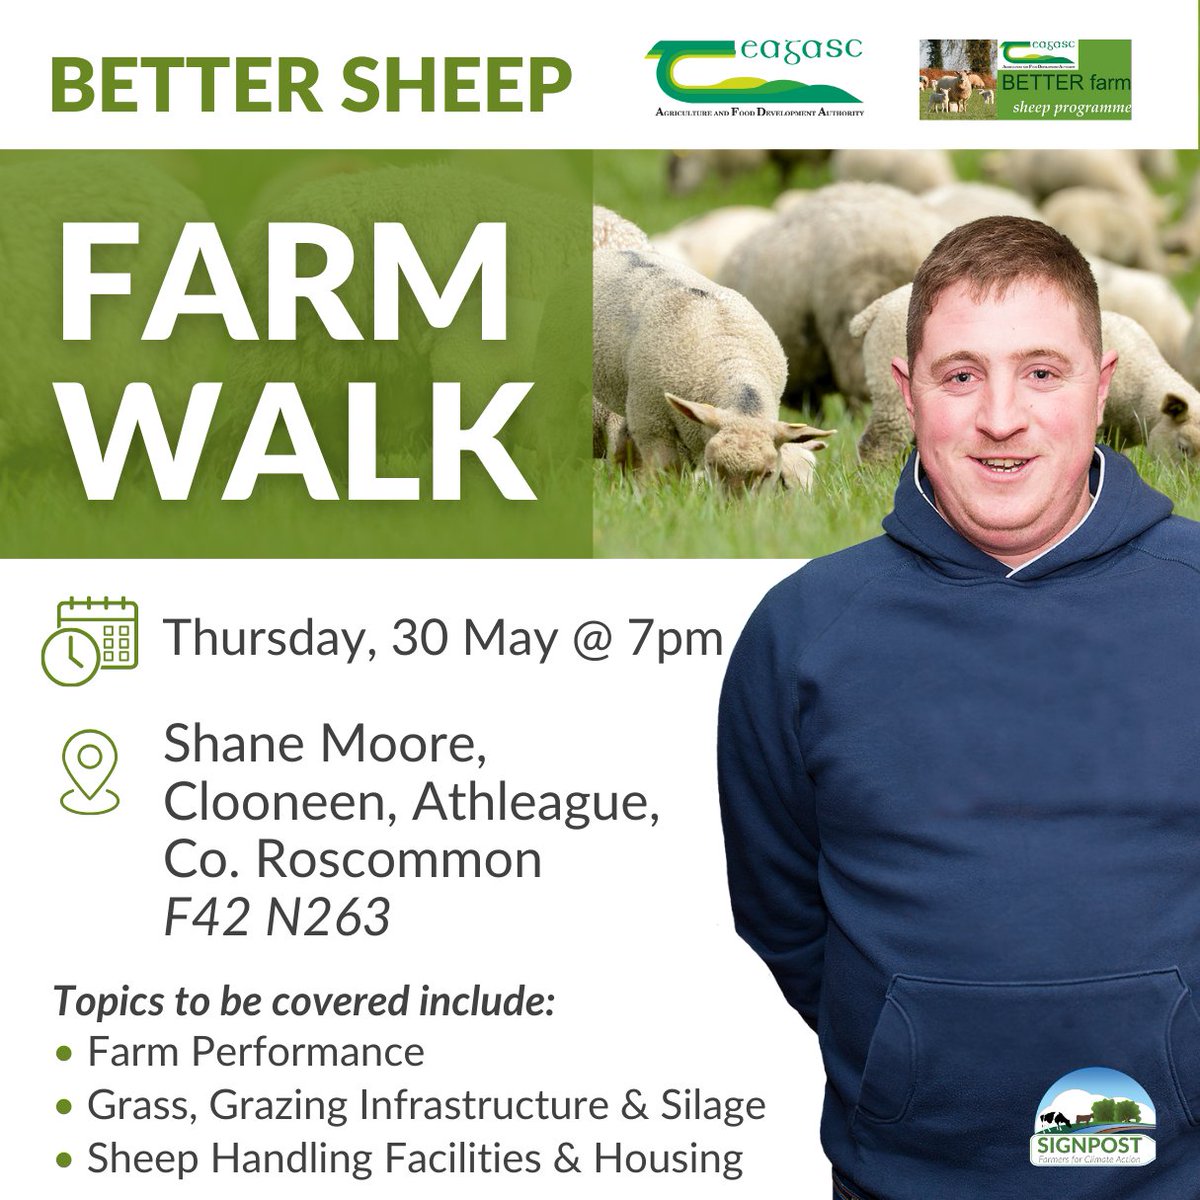 At the upcoming BETTER Sheep Lowland Farm Walk of Shane Moore on Thursday, 30 May at 7pm in Cloneen, Athleague, Co. Roscommon, attendees will gain an insight into his farm performance. Find out more bit.ly/3wzJUXm @TeagascSheep @TeagascSignpost @TeagascRNLD